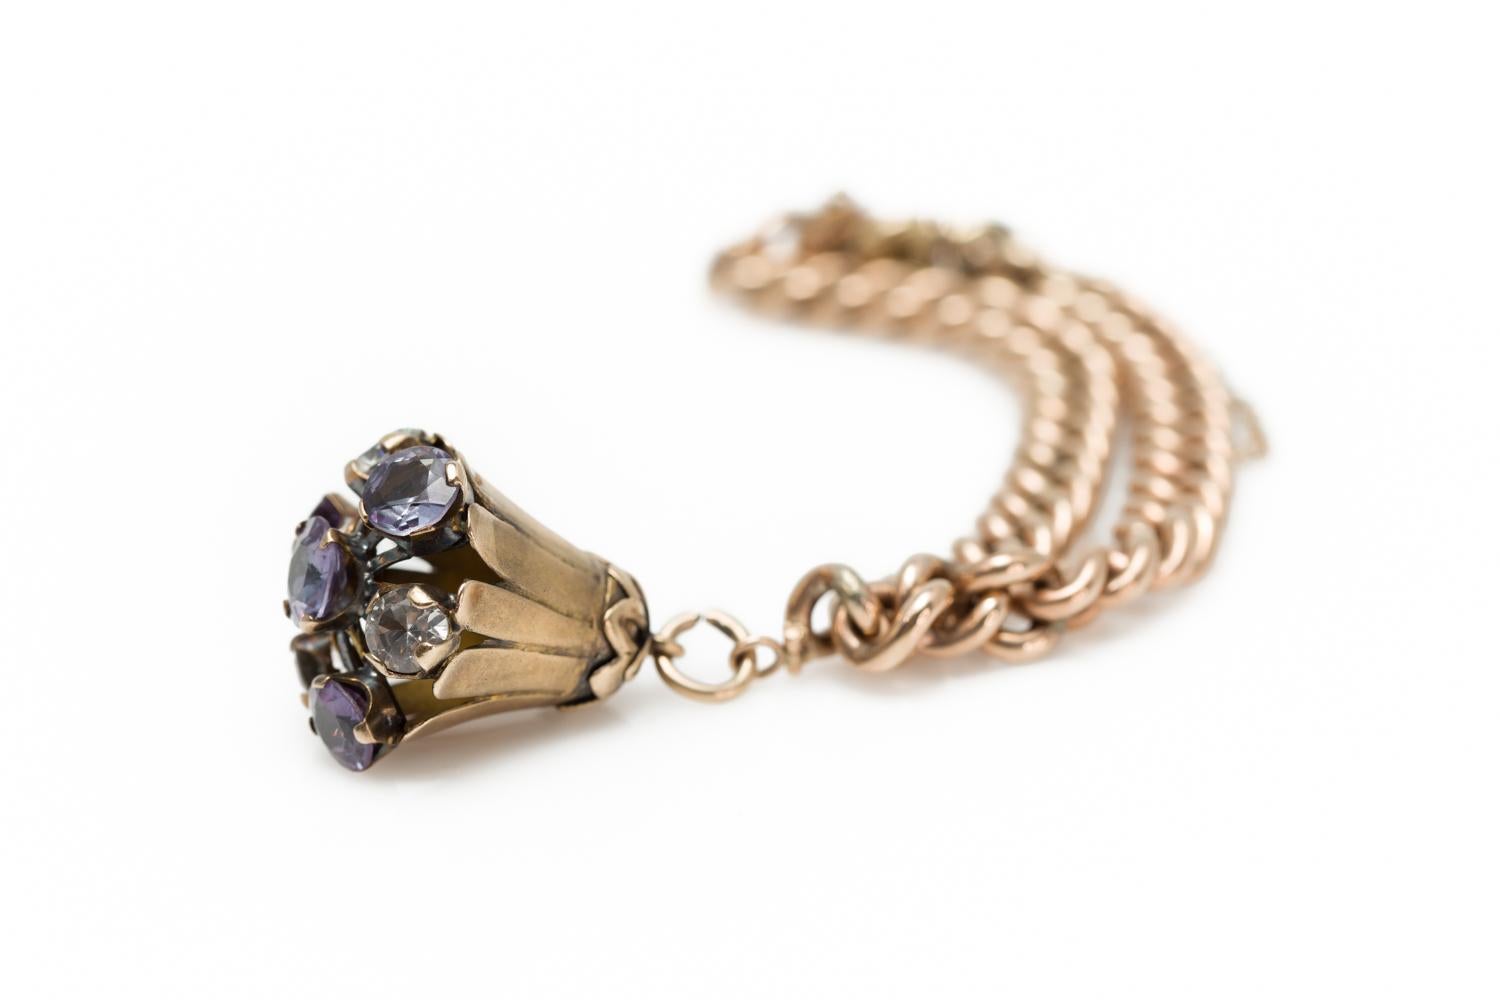 An antique Victorian Amethyst and white Quartz floral-shaped single charm bracelet in 14K rose gold from the late 19th century. Crafted in the USA, this antique Victorian bracelet features Amethysts of approximately 7mm, alternating with 5.85mm